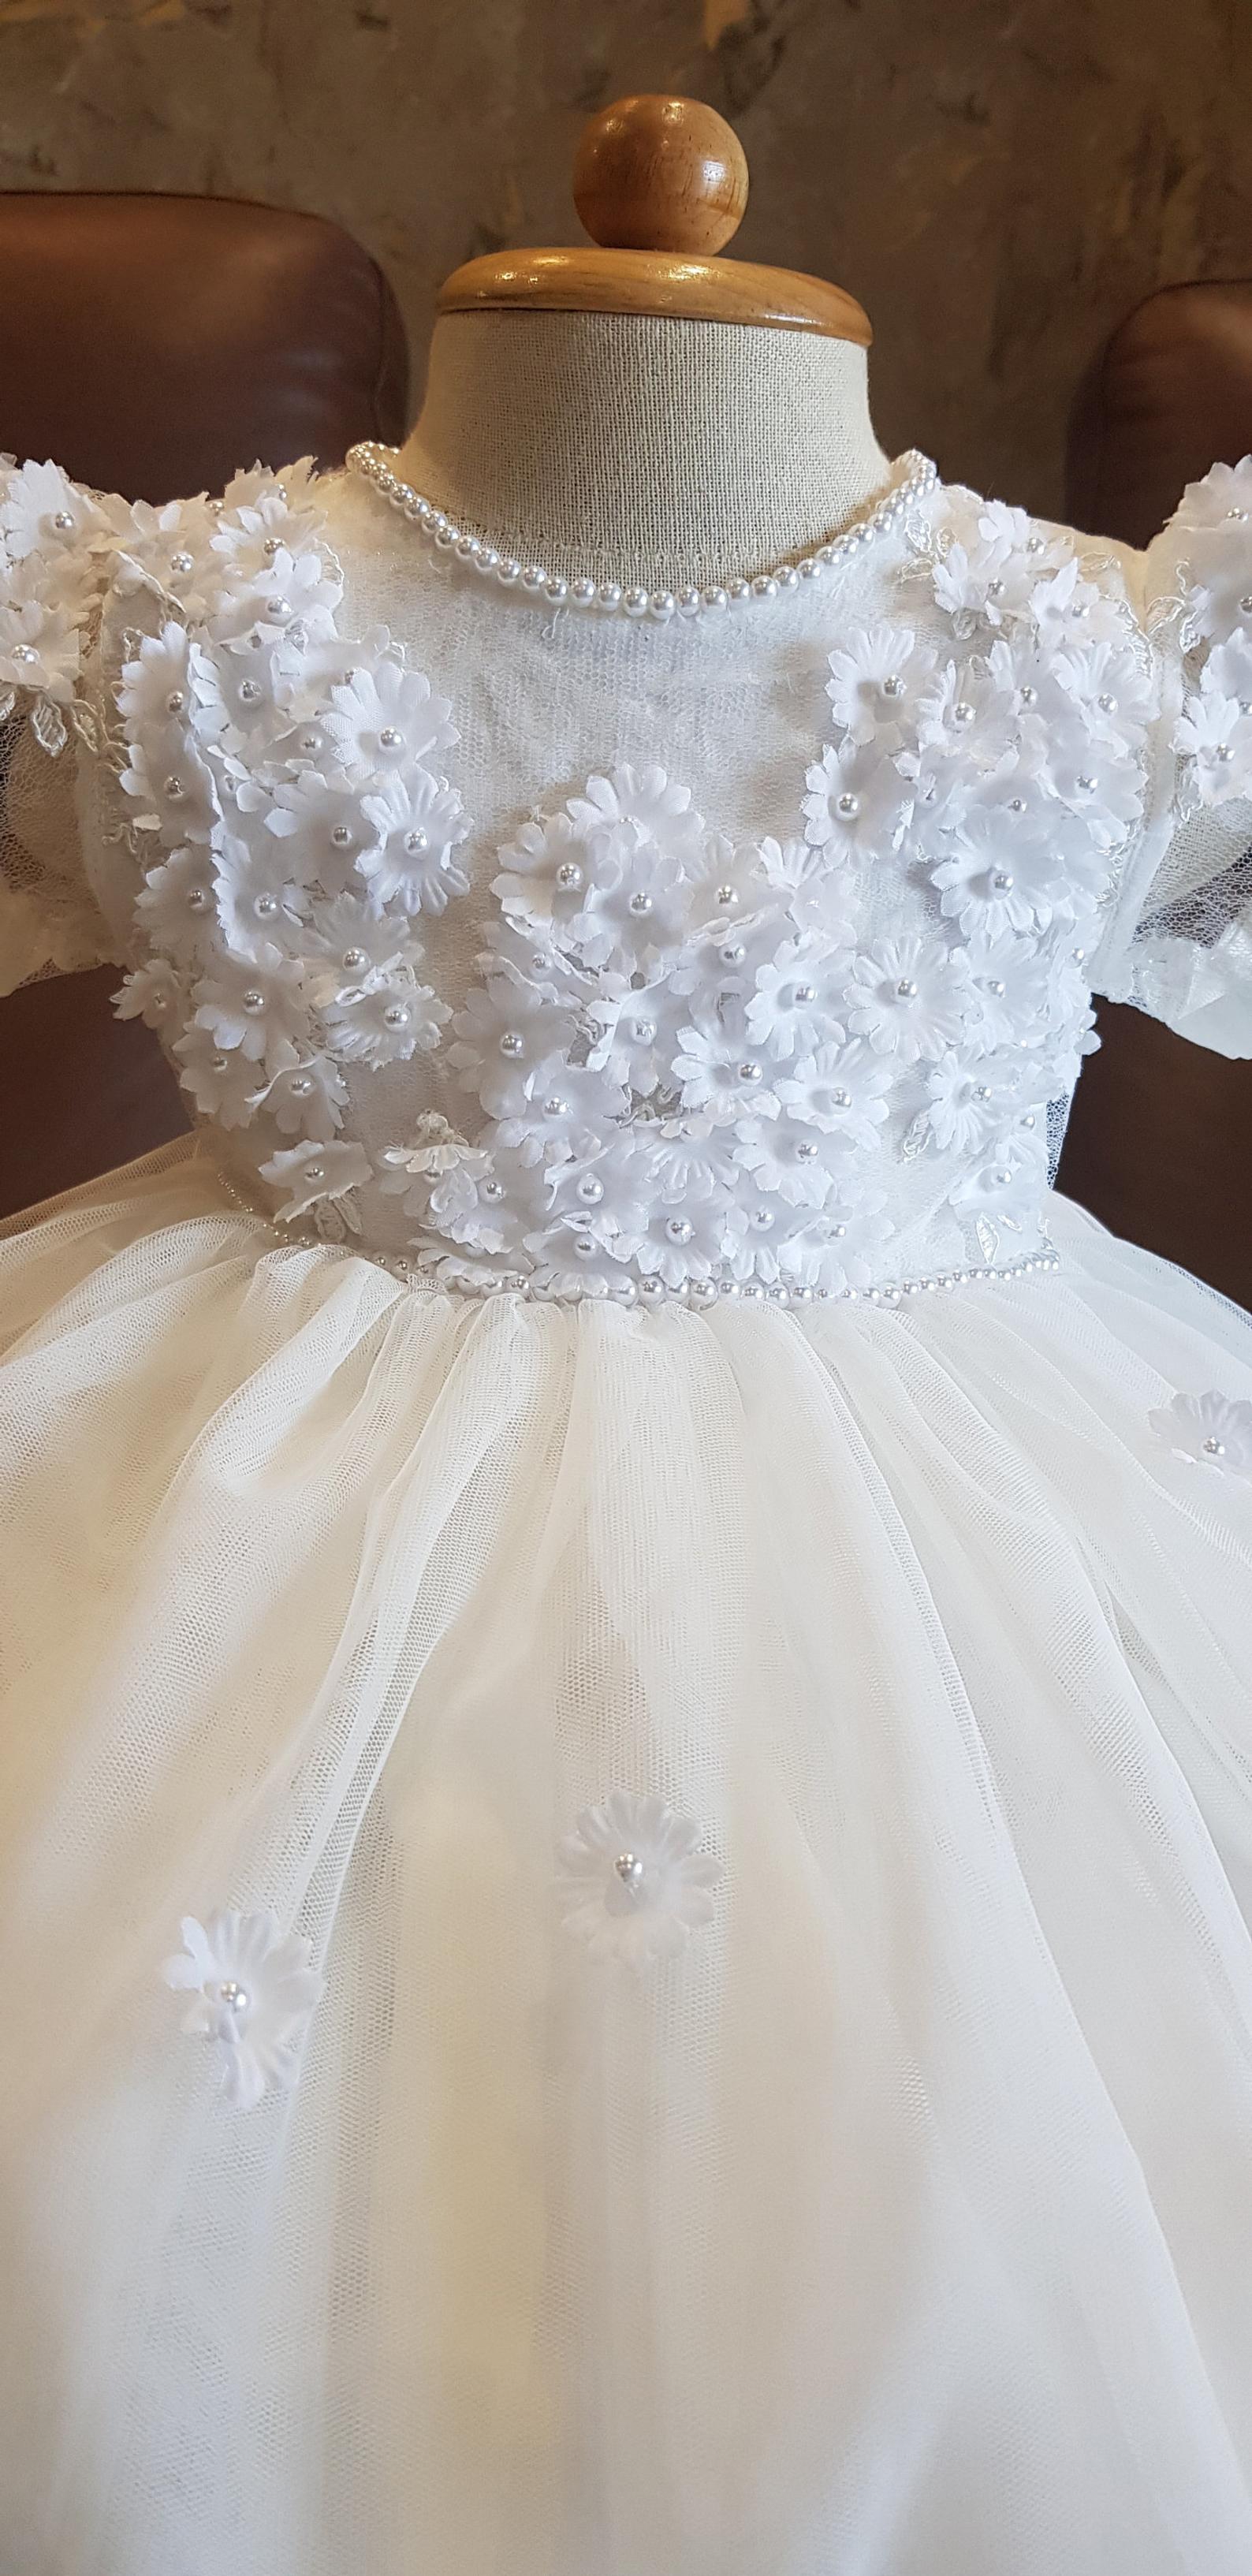 Girls Lace Baptism Gown | Kristina – Christeninggowns.com